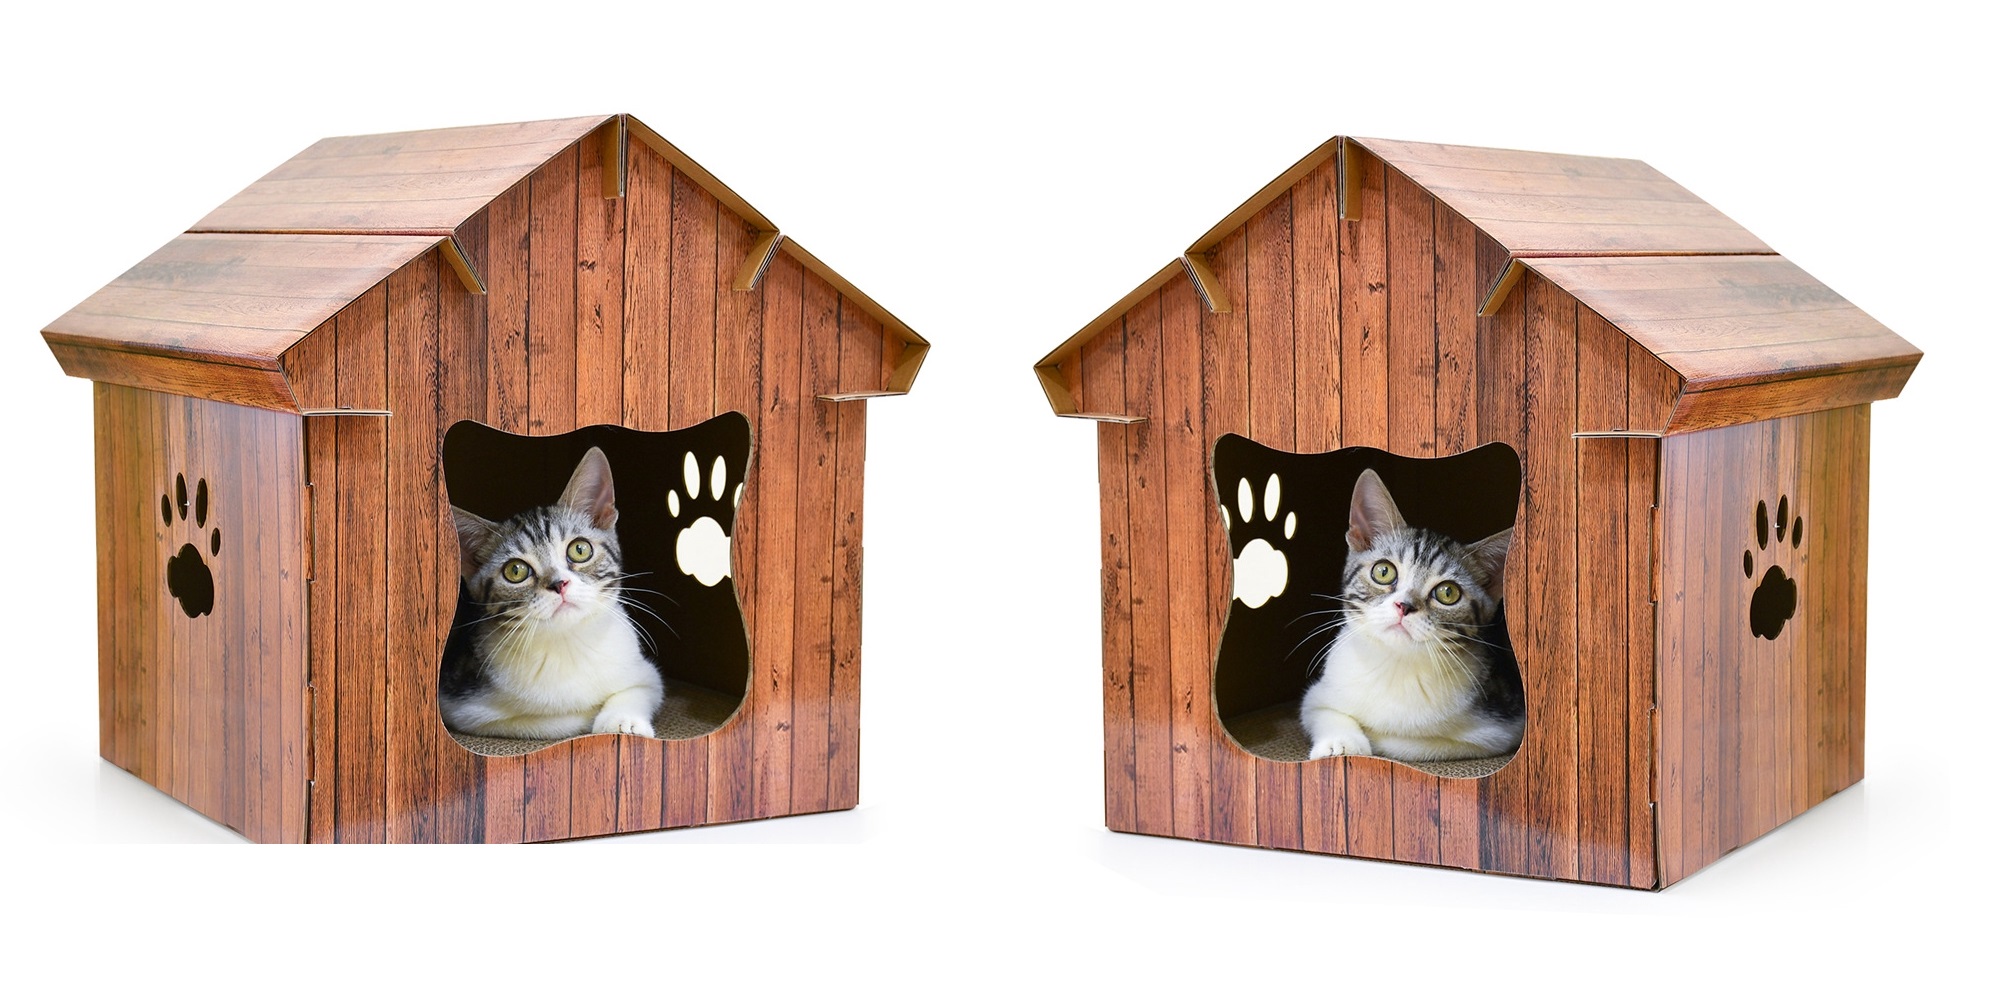 Aivituvin Outdoor Cat House For Winter For Your Cat’s Comfort